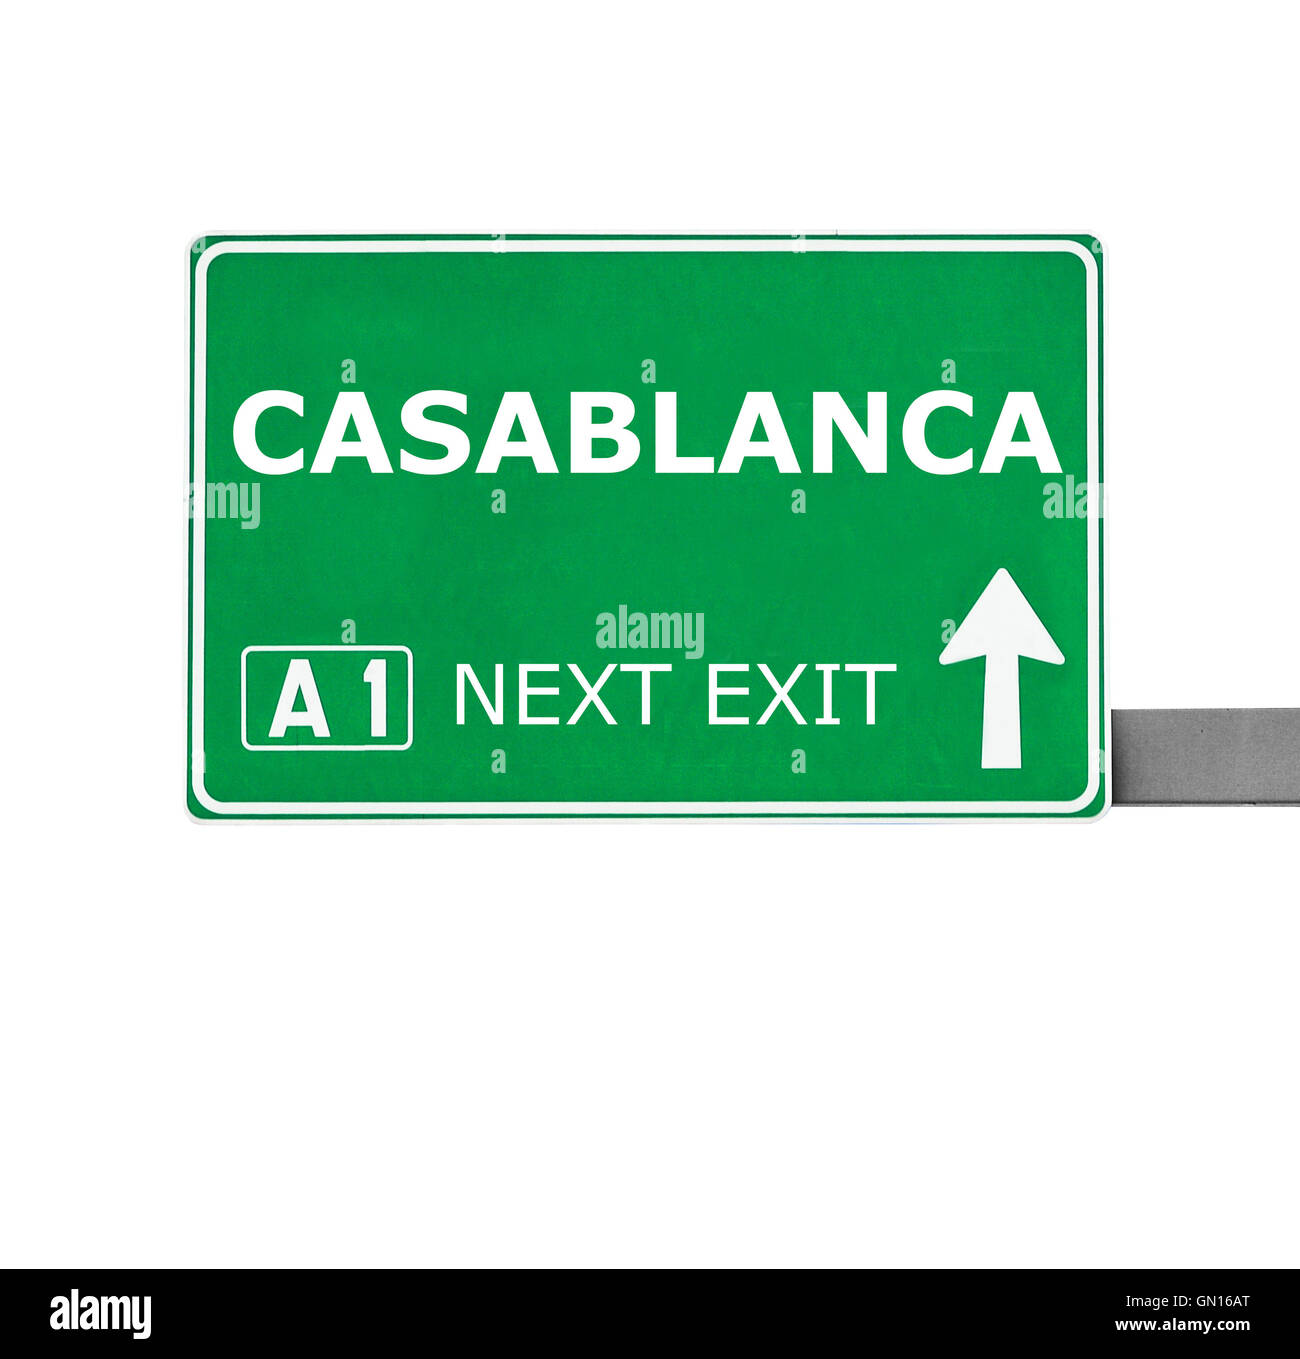 CASABLANCA road sign isolated on white Banque D'Images